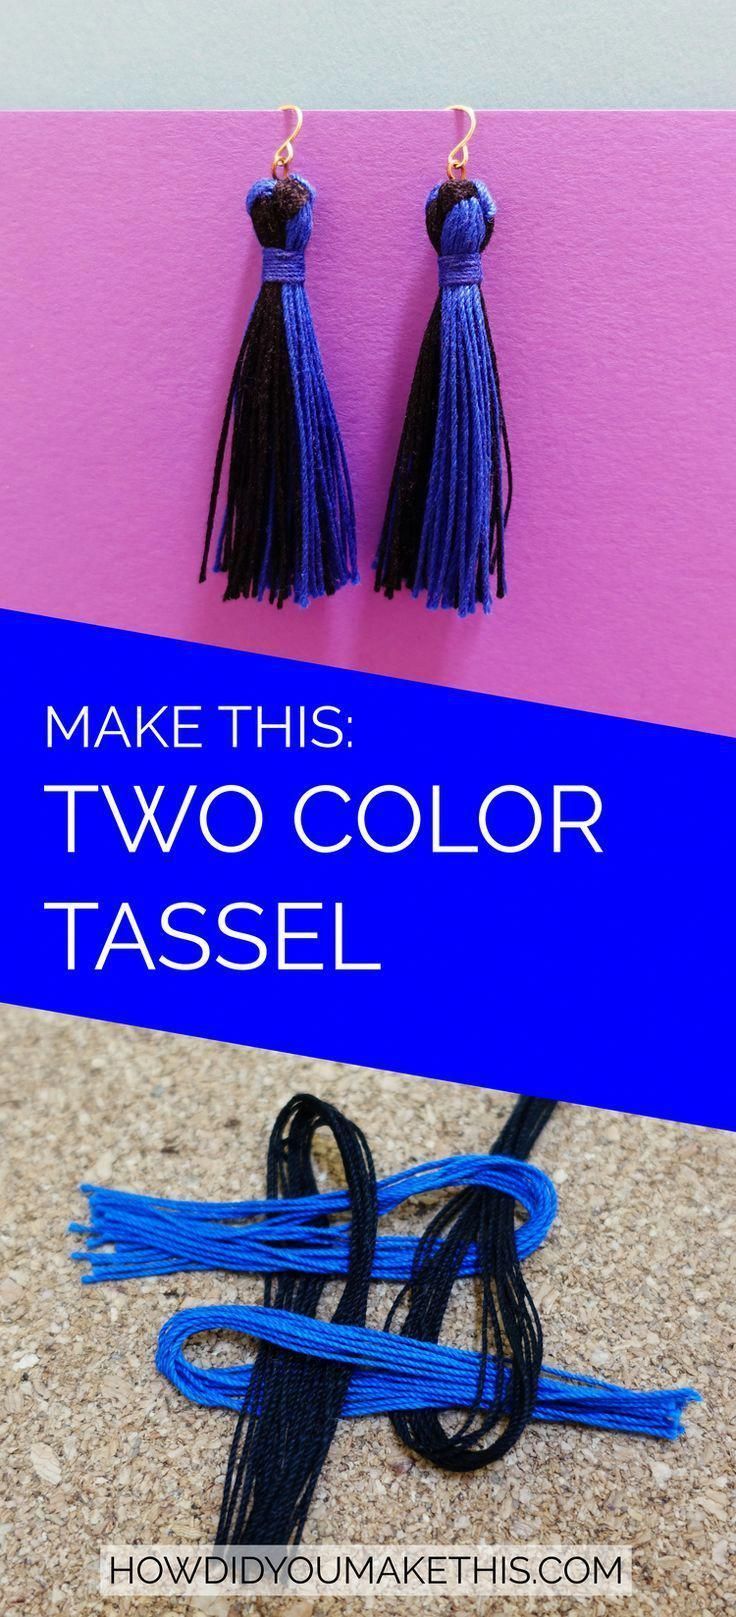 Two-Color Tassel Earrings - How Did You Make This? | Luxe DIY - Two-Color Tassel Earrings - How Did You Make This? | Luxe DIY -   18 diy Easy jewelry ideas